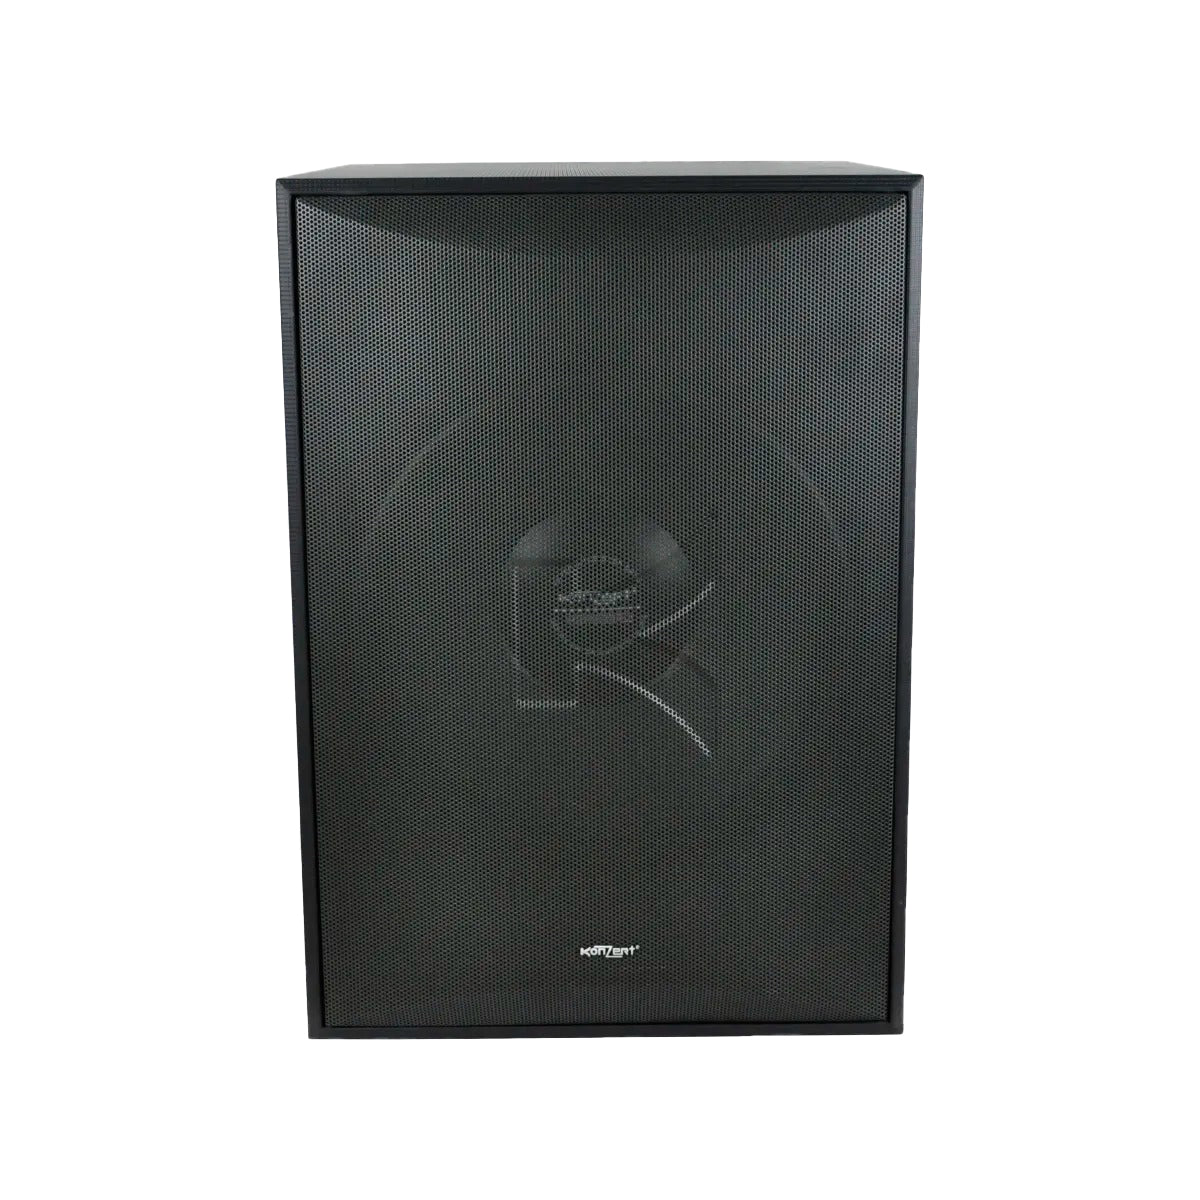 Konzert KS-15SUB 15" 400W Active Powered Subwoofer with Amplifier, Dual Port Bass Reflex and RCA and Binding Post Connector Inputs